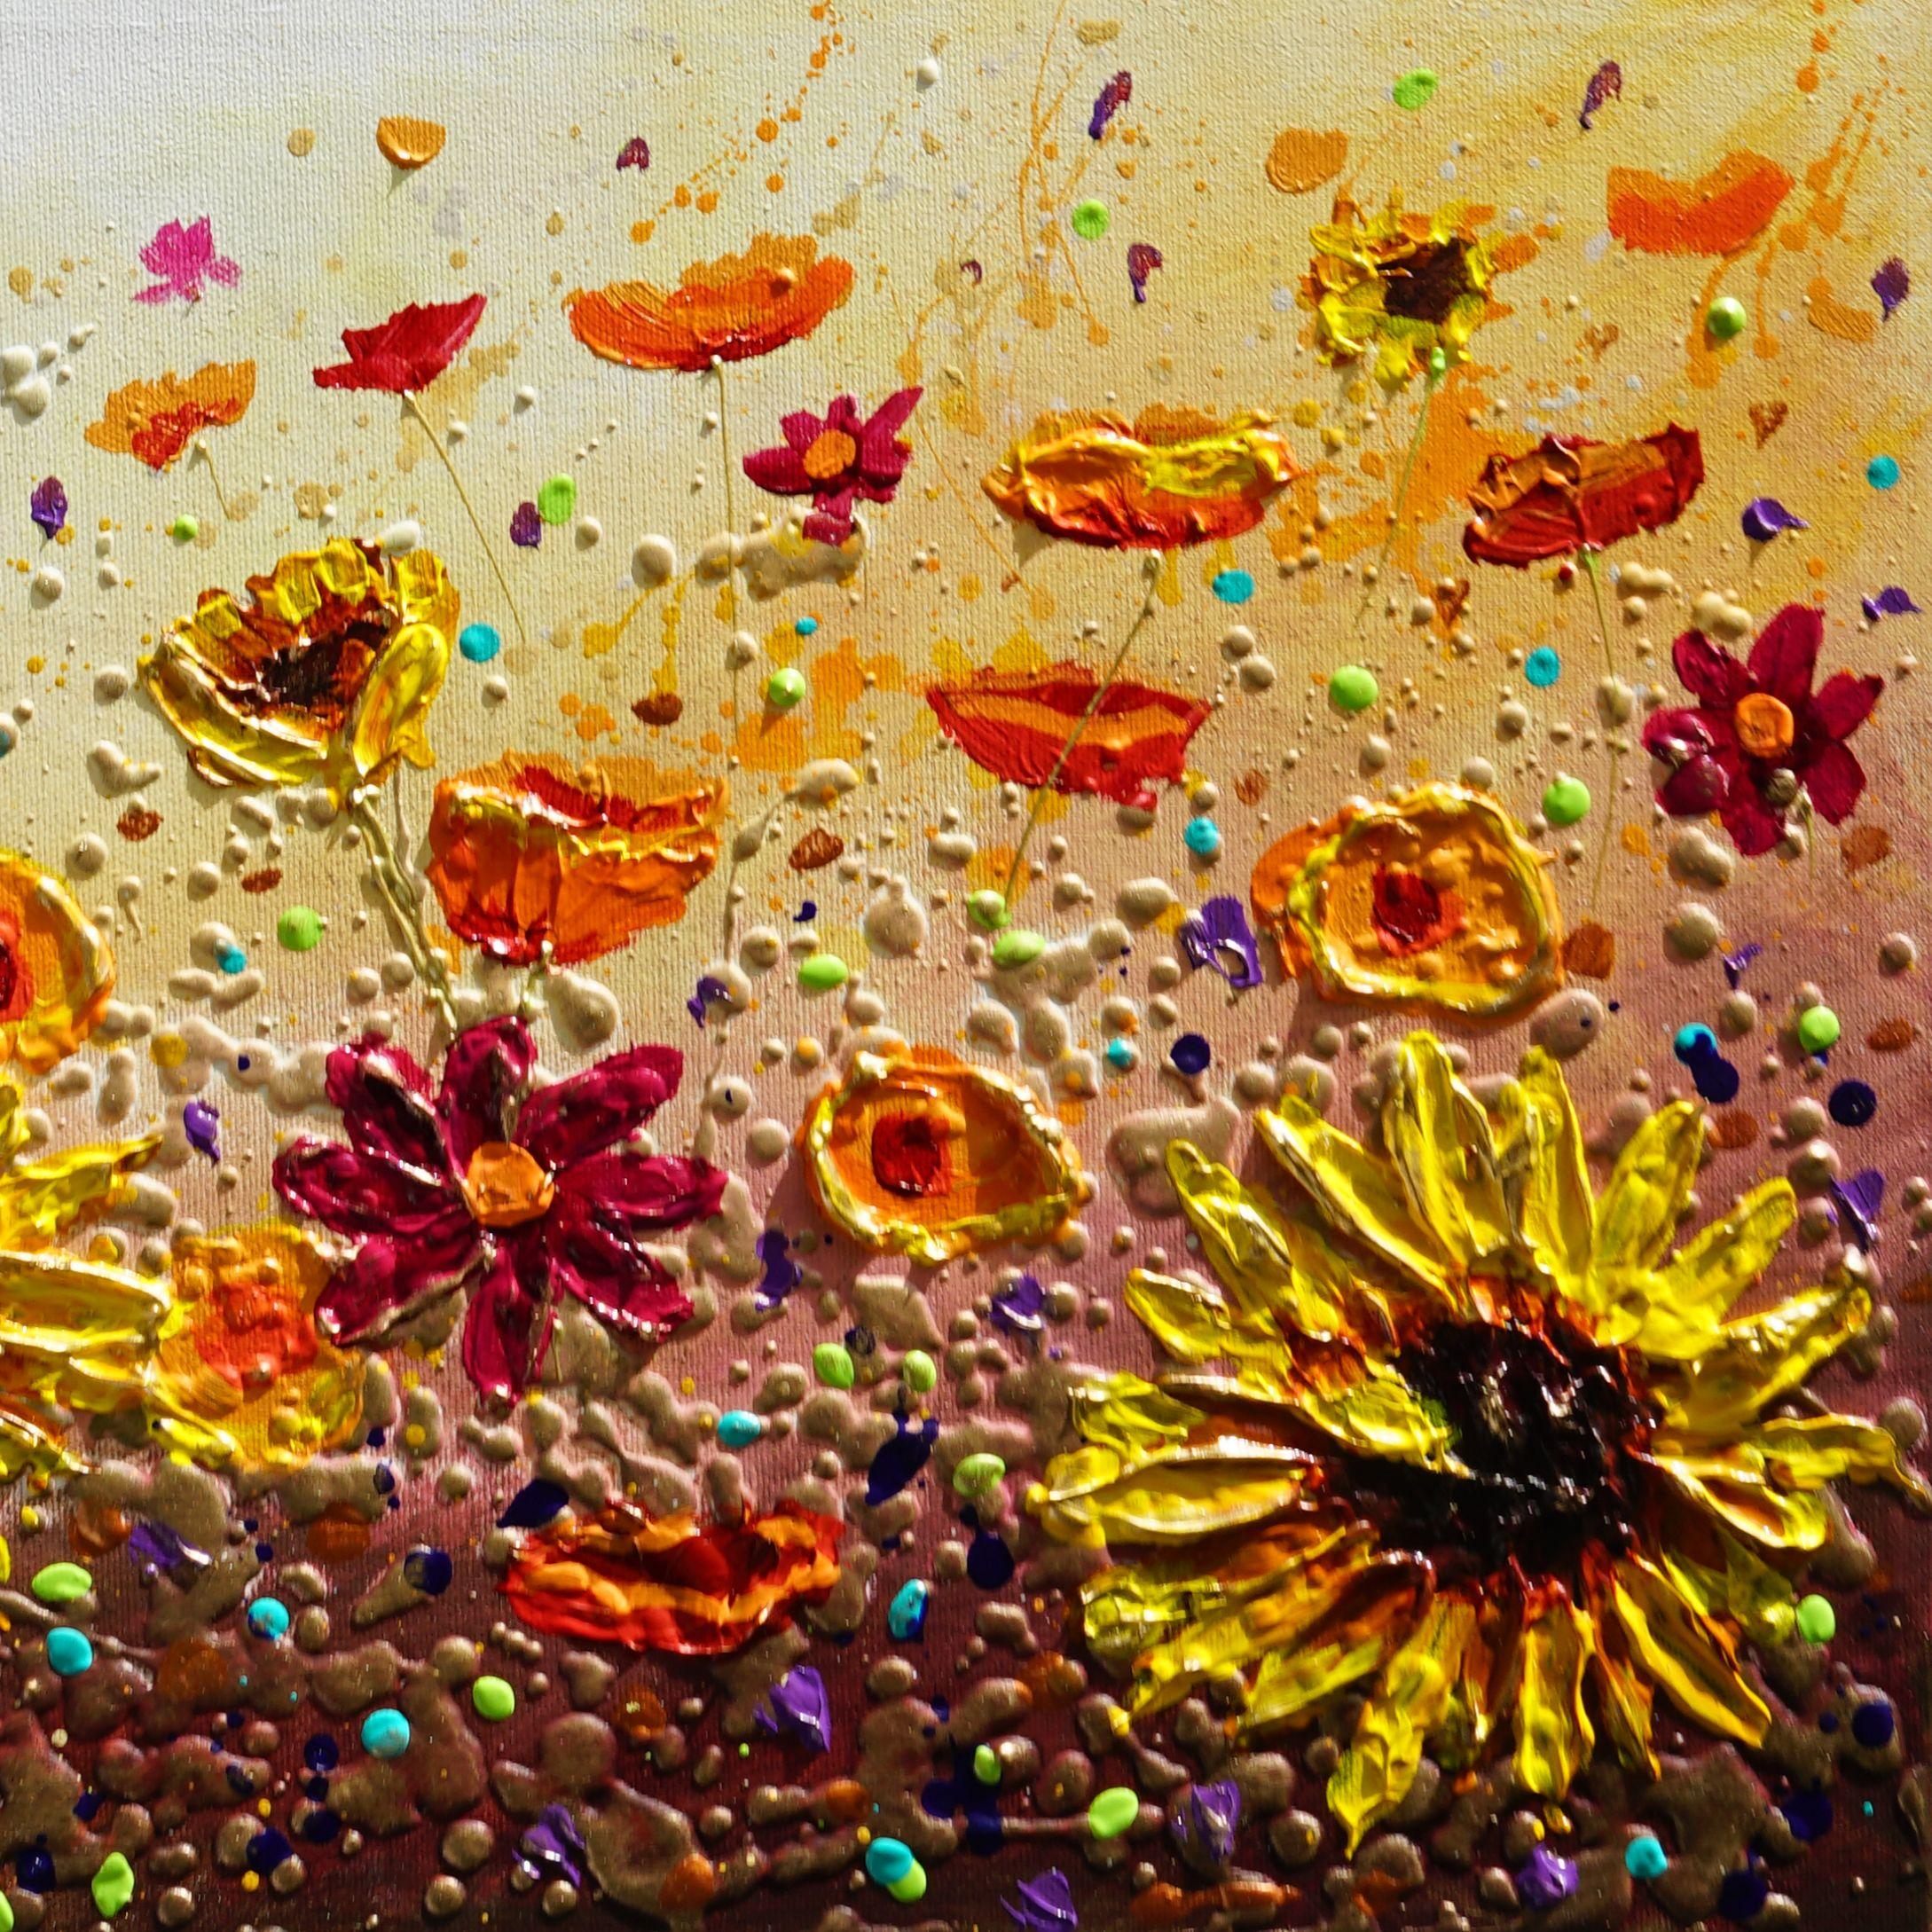 Sunlit Floral, Painting, Acrylic on Canvas 3